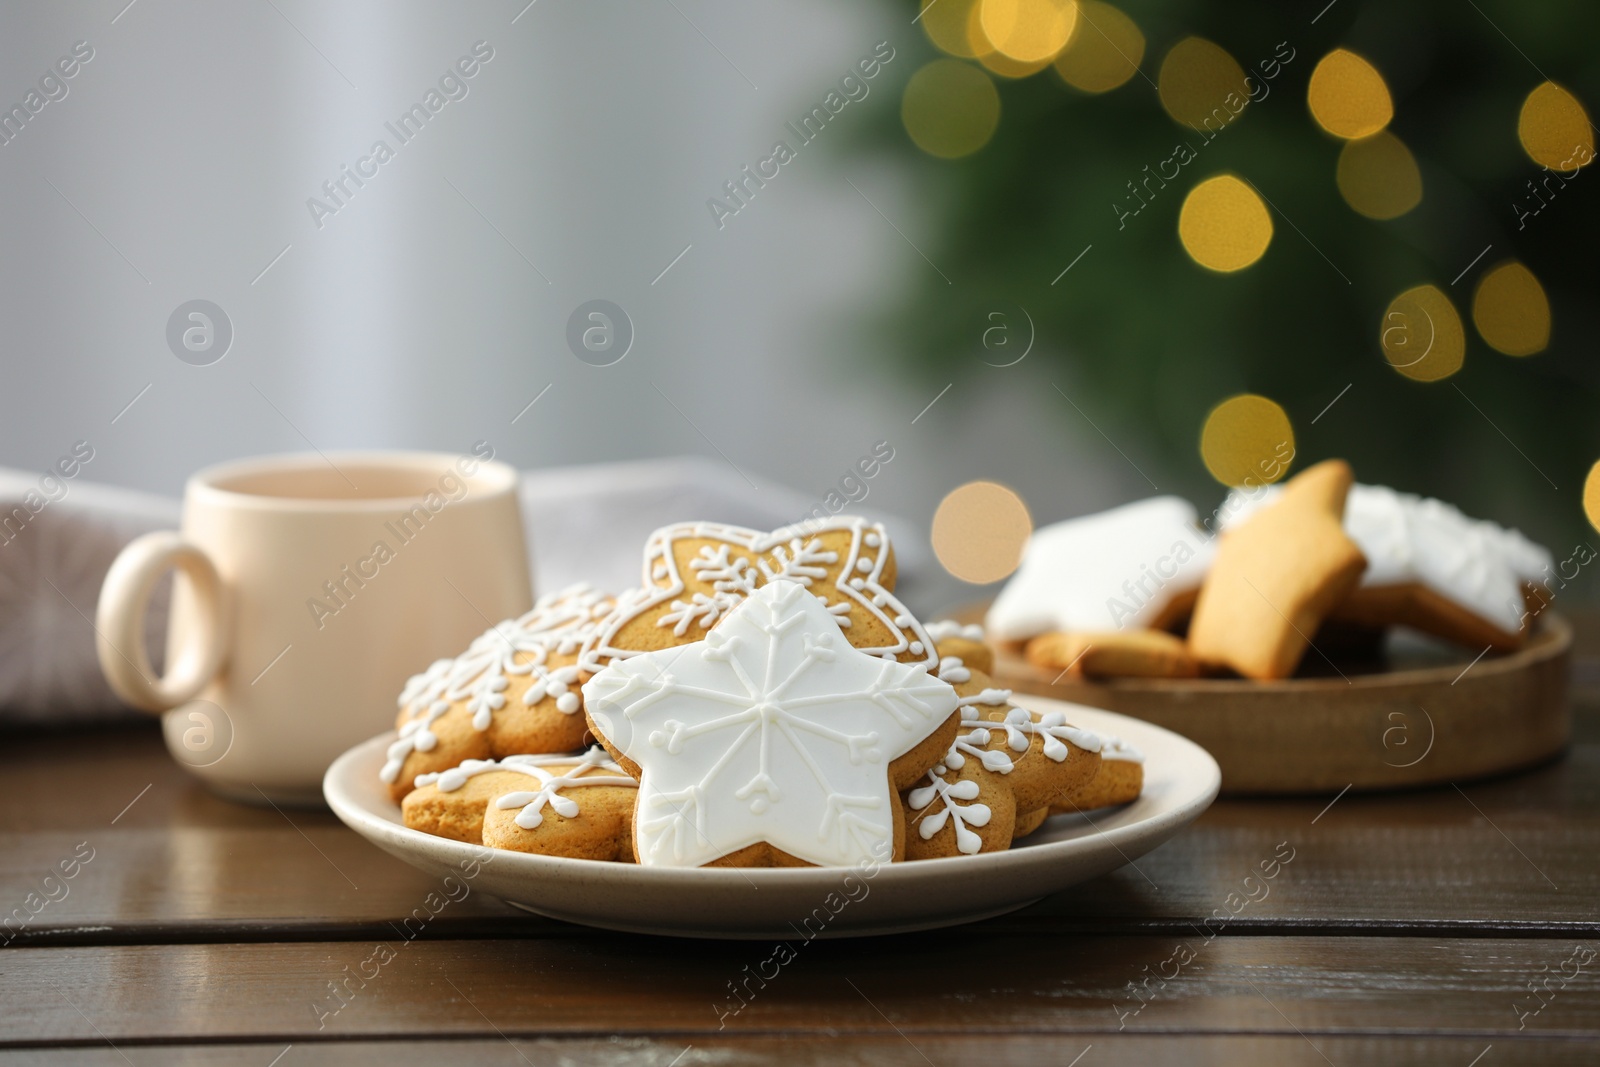 Photo of Decorated cookies and hot drink on wooden against blurred Christmas lights